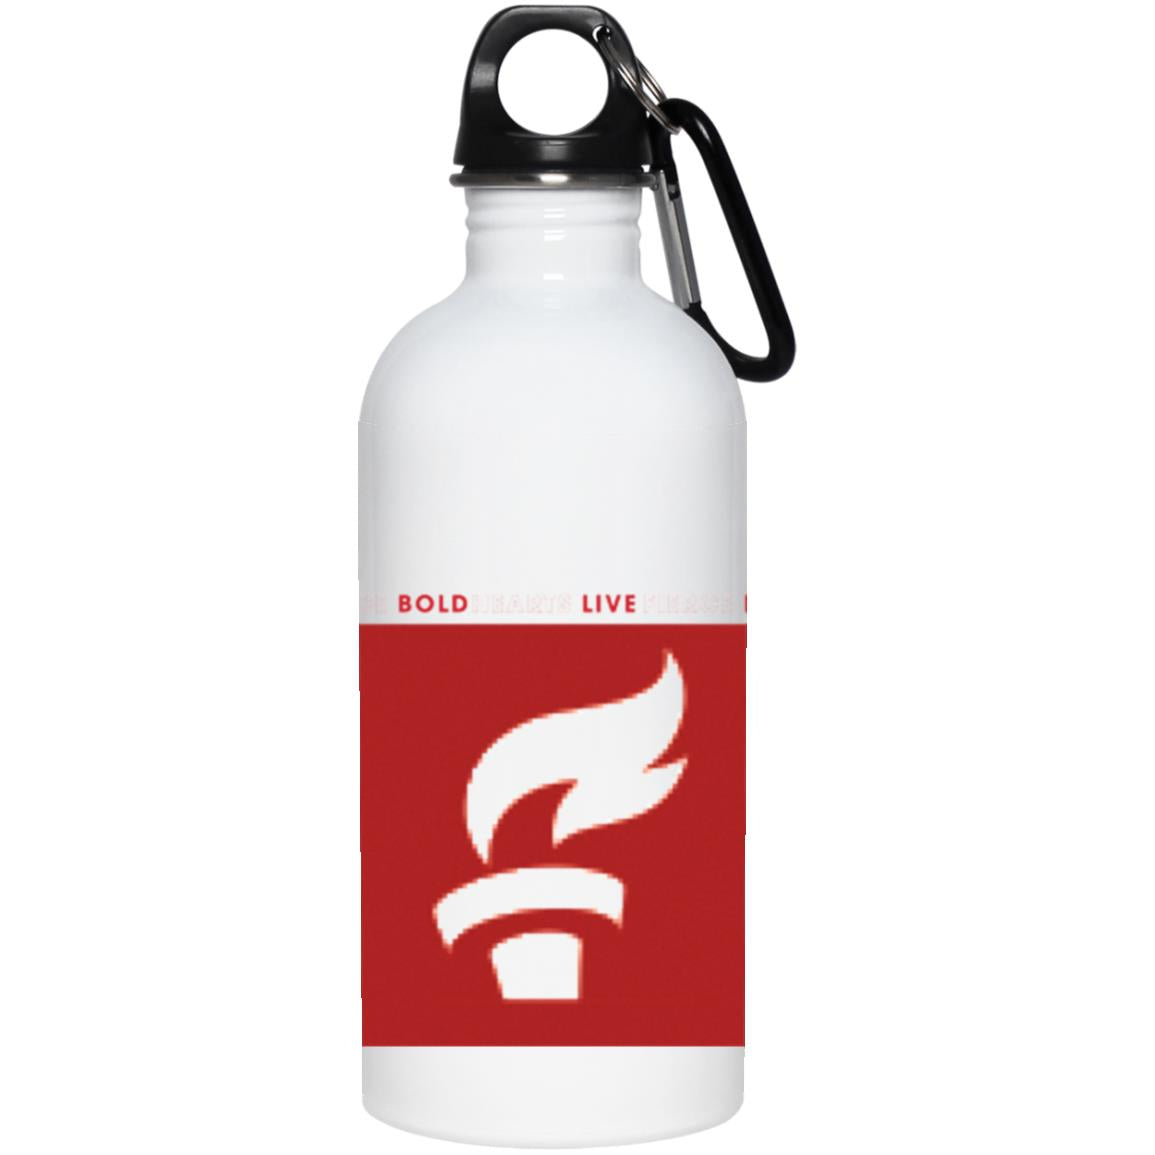 white stainless steel water bottle with screw top and caribiner. features a design of the AHA torch with textured look on a red background and words "bold hearts. live fierce." above it.